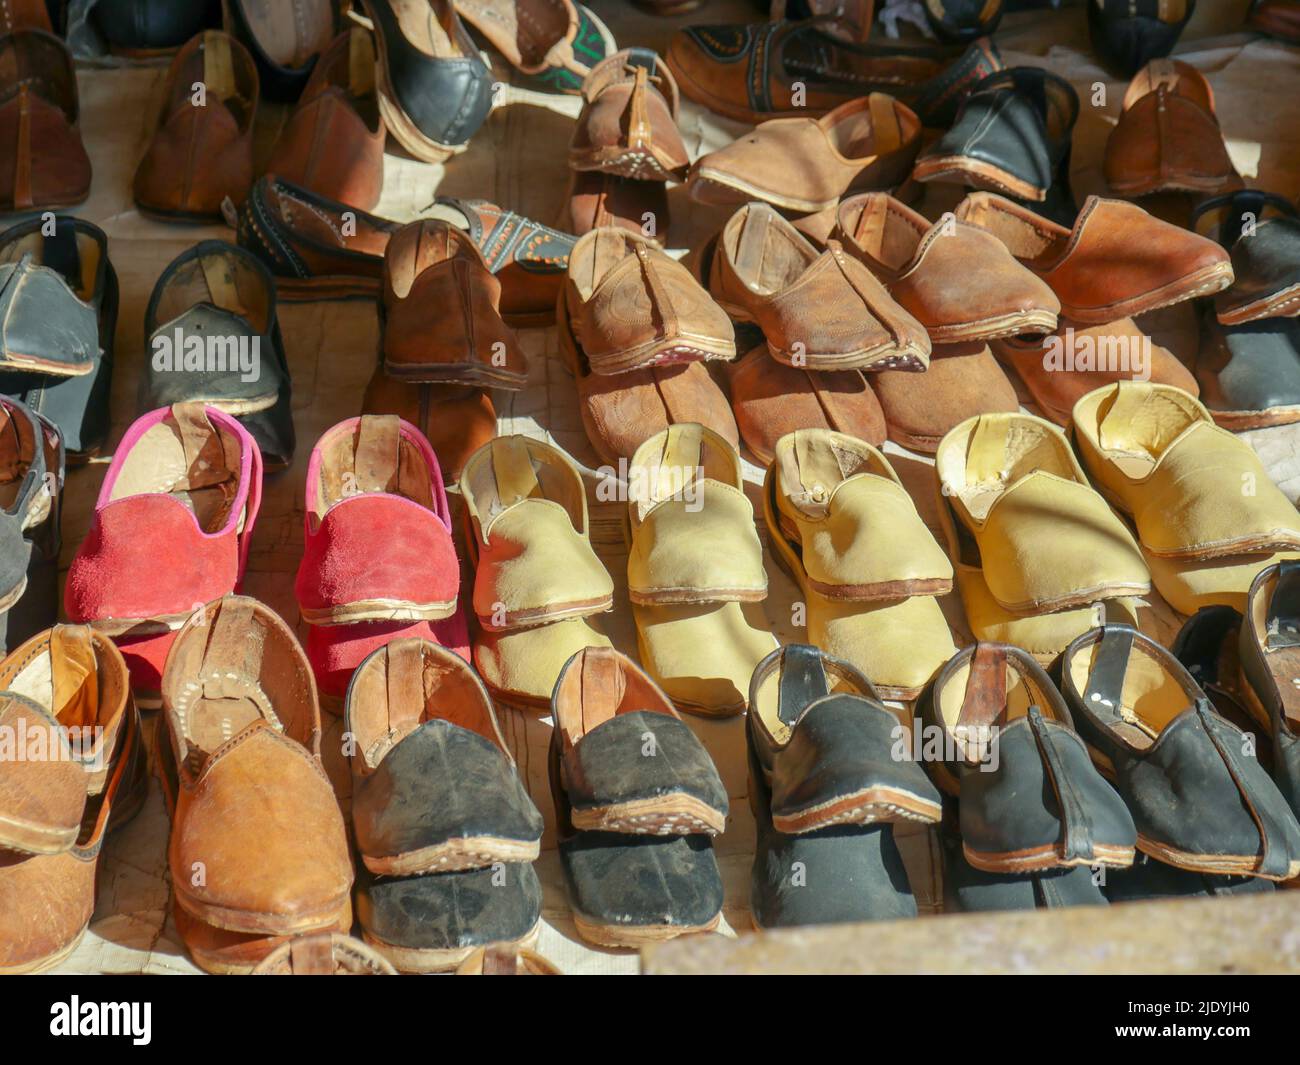 Mojdi shoes footwears, a type of tradition Indian handmade leather shoes Stock Photo